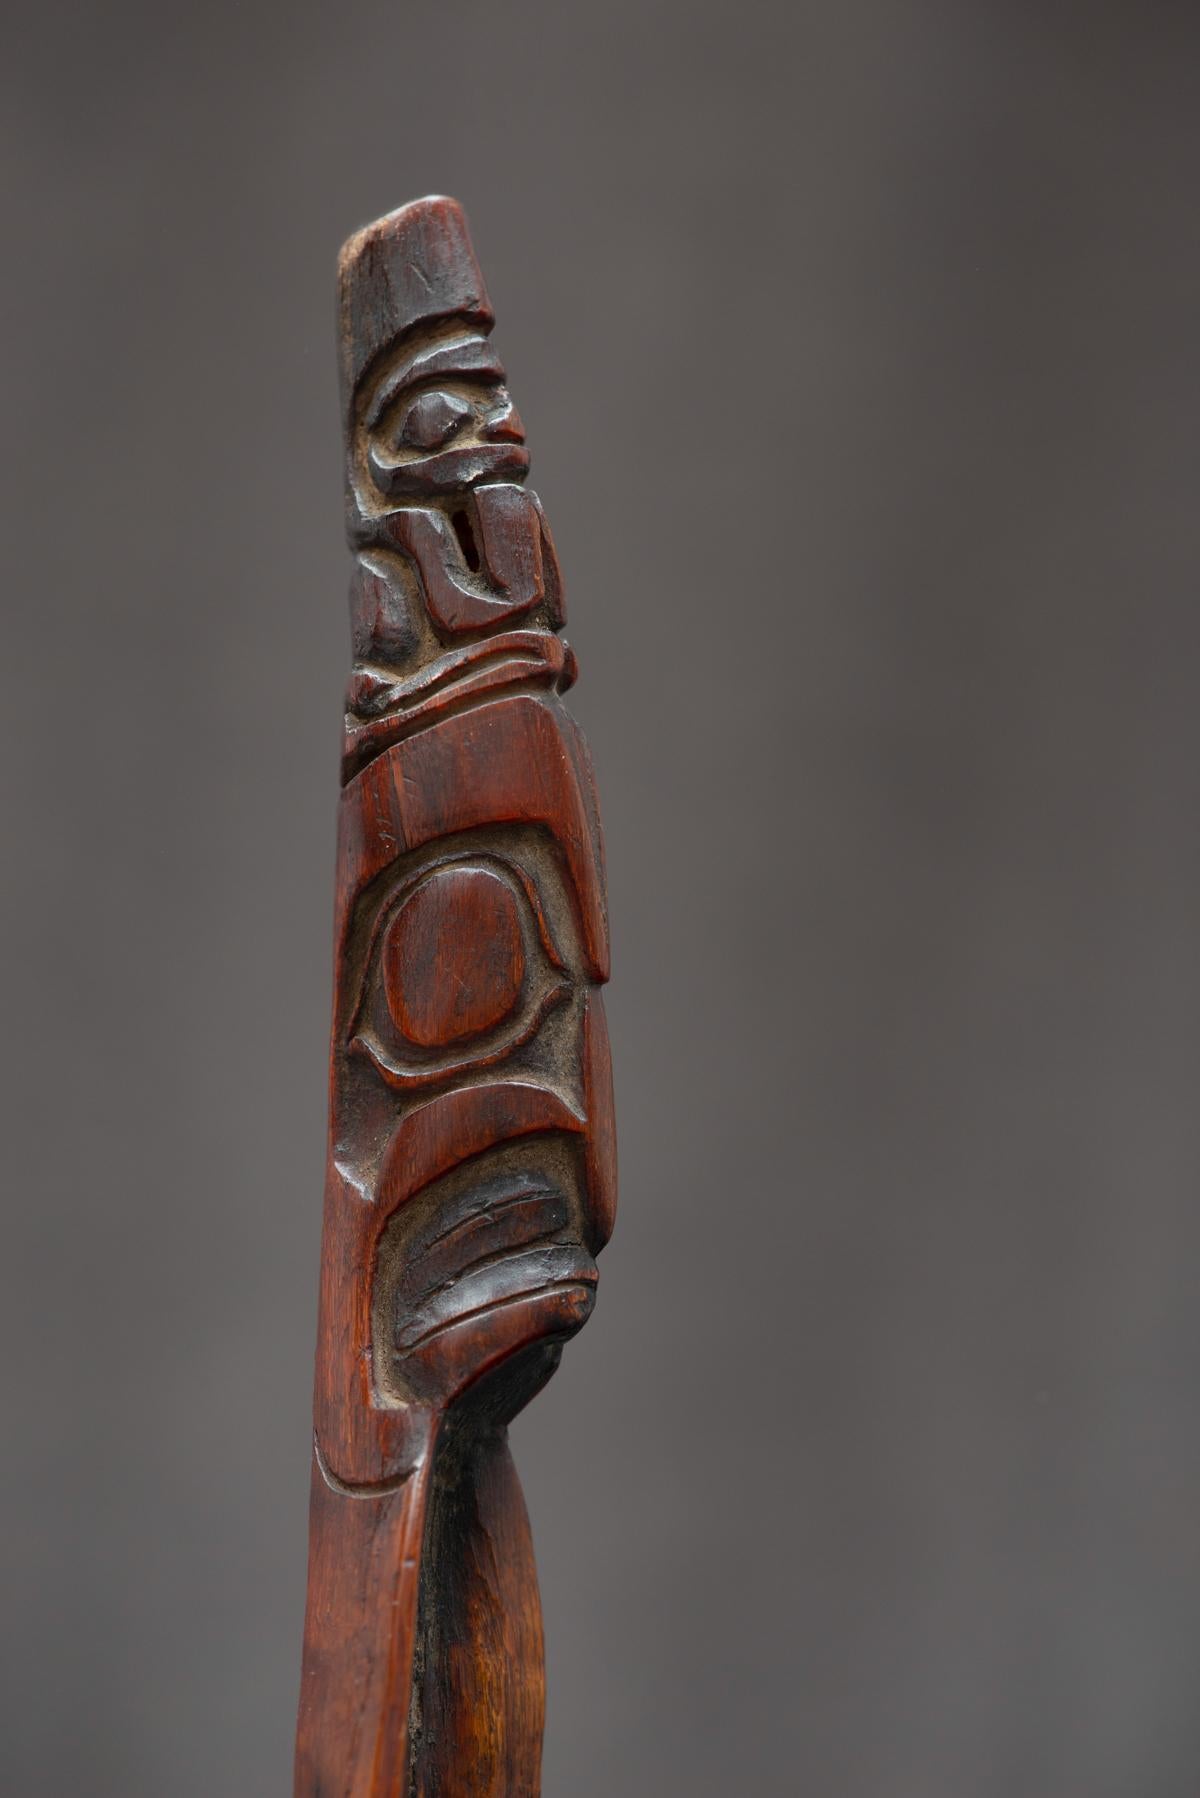 Tribe: Northwest Coast, Tlingit

Date: Early to Mid 19th Century

Materials: Mountain sheep horn

Dimensions: L. 20 1/2